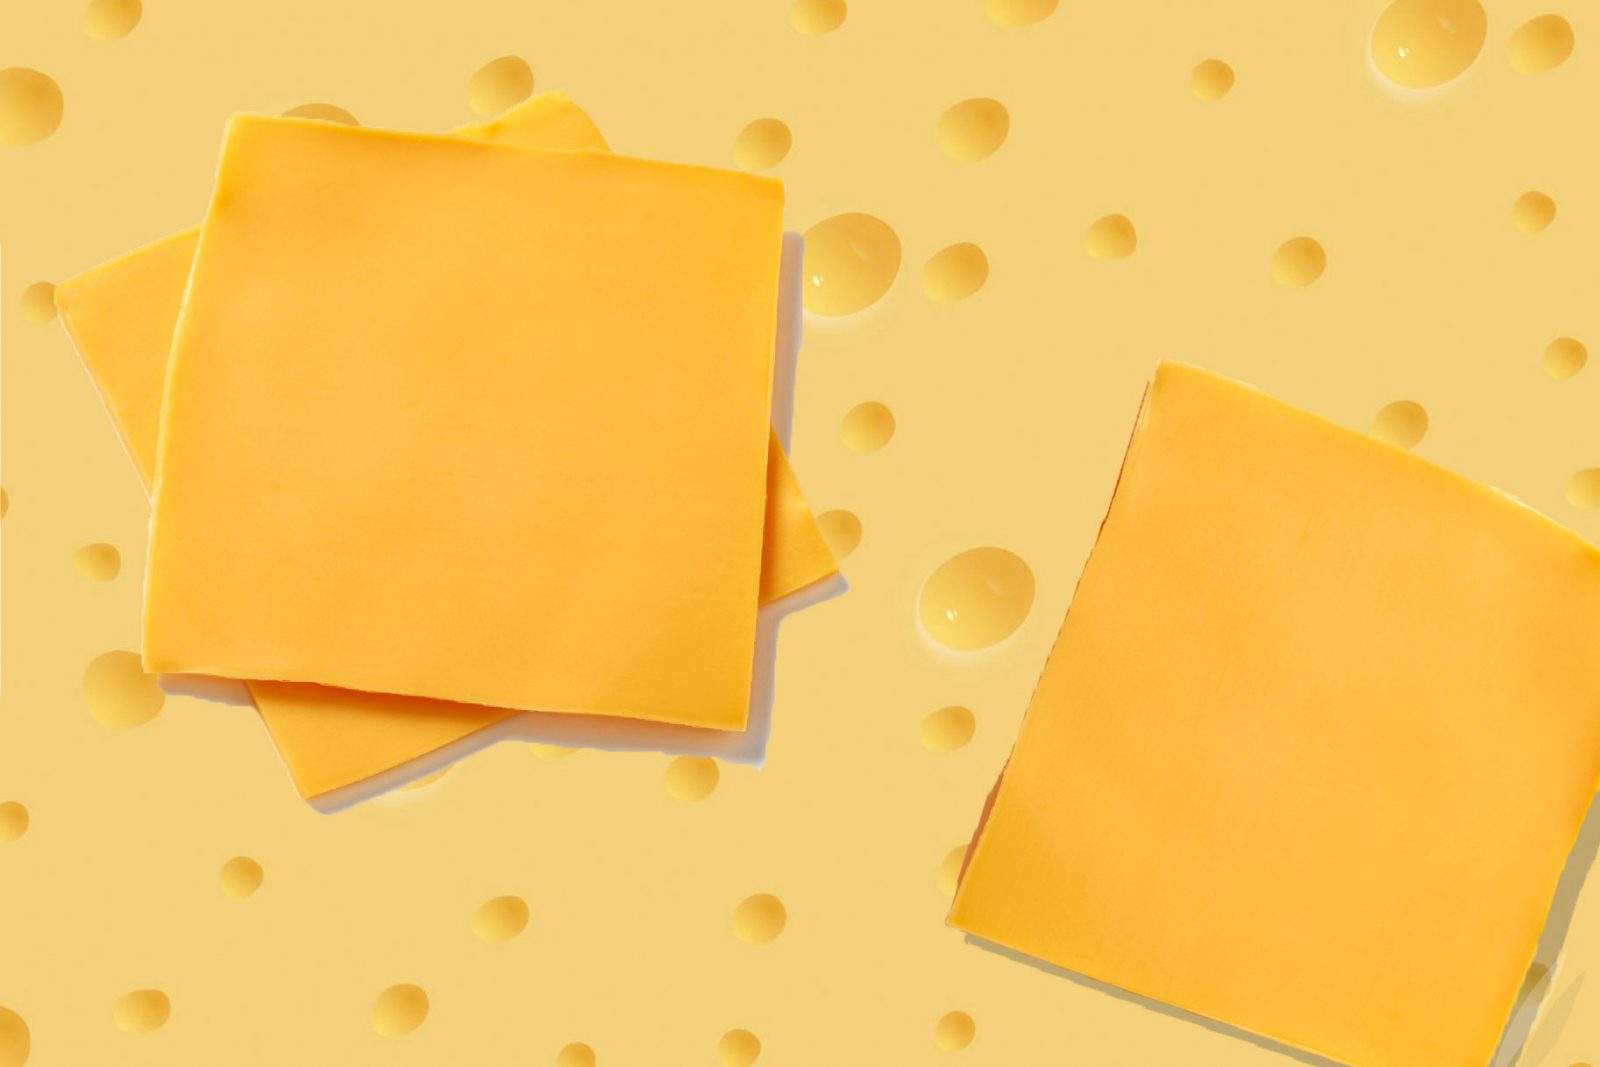 Prove to Be a Trivia Genius by Answering These 20 Random Questions american cheese1